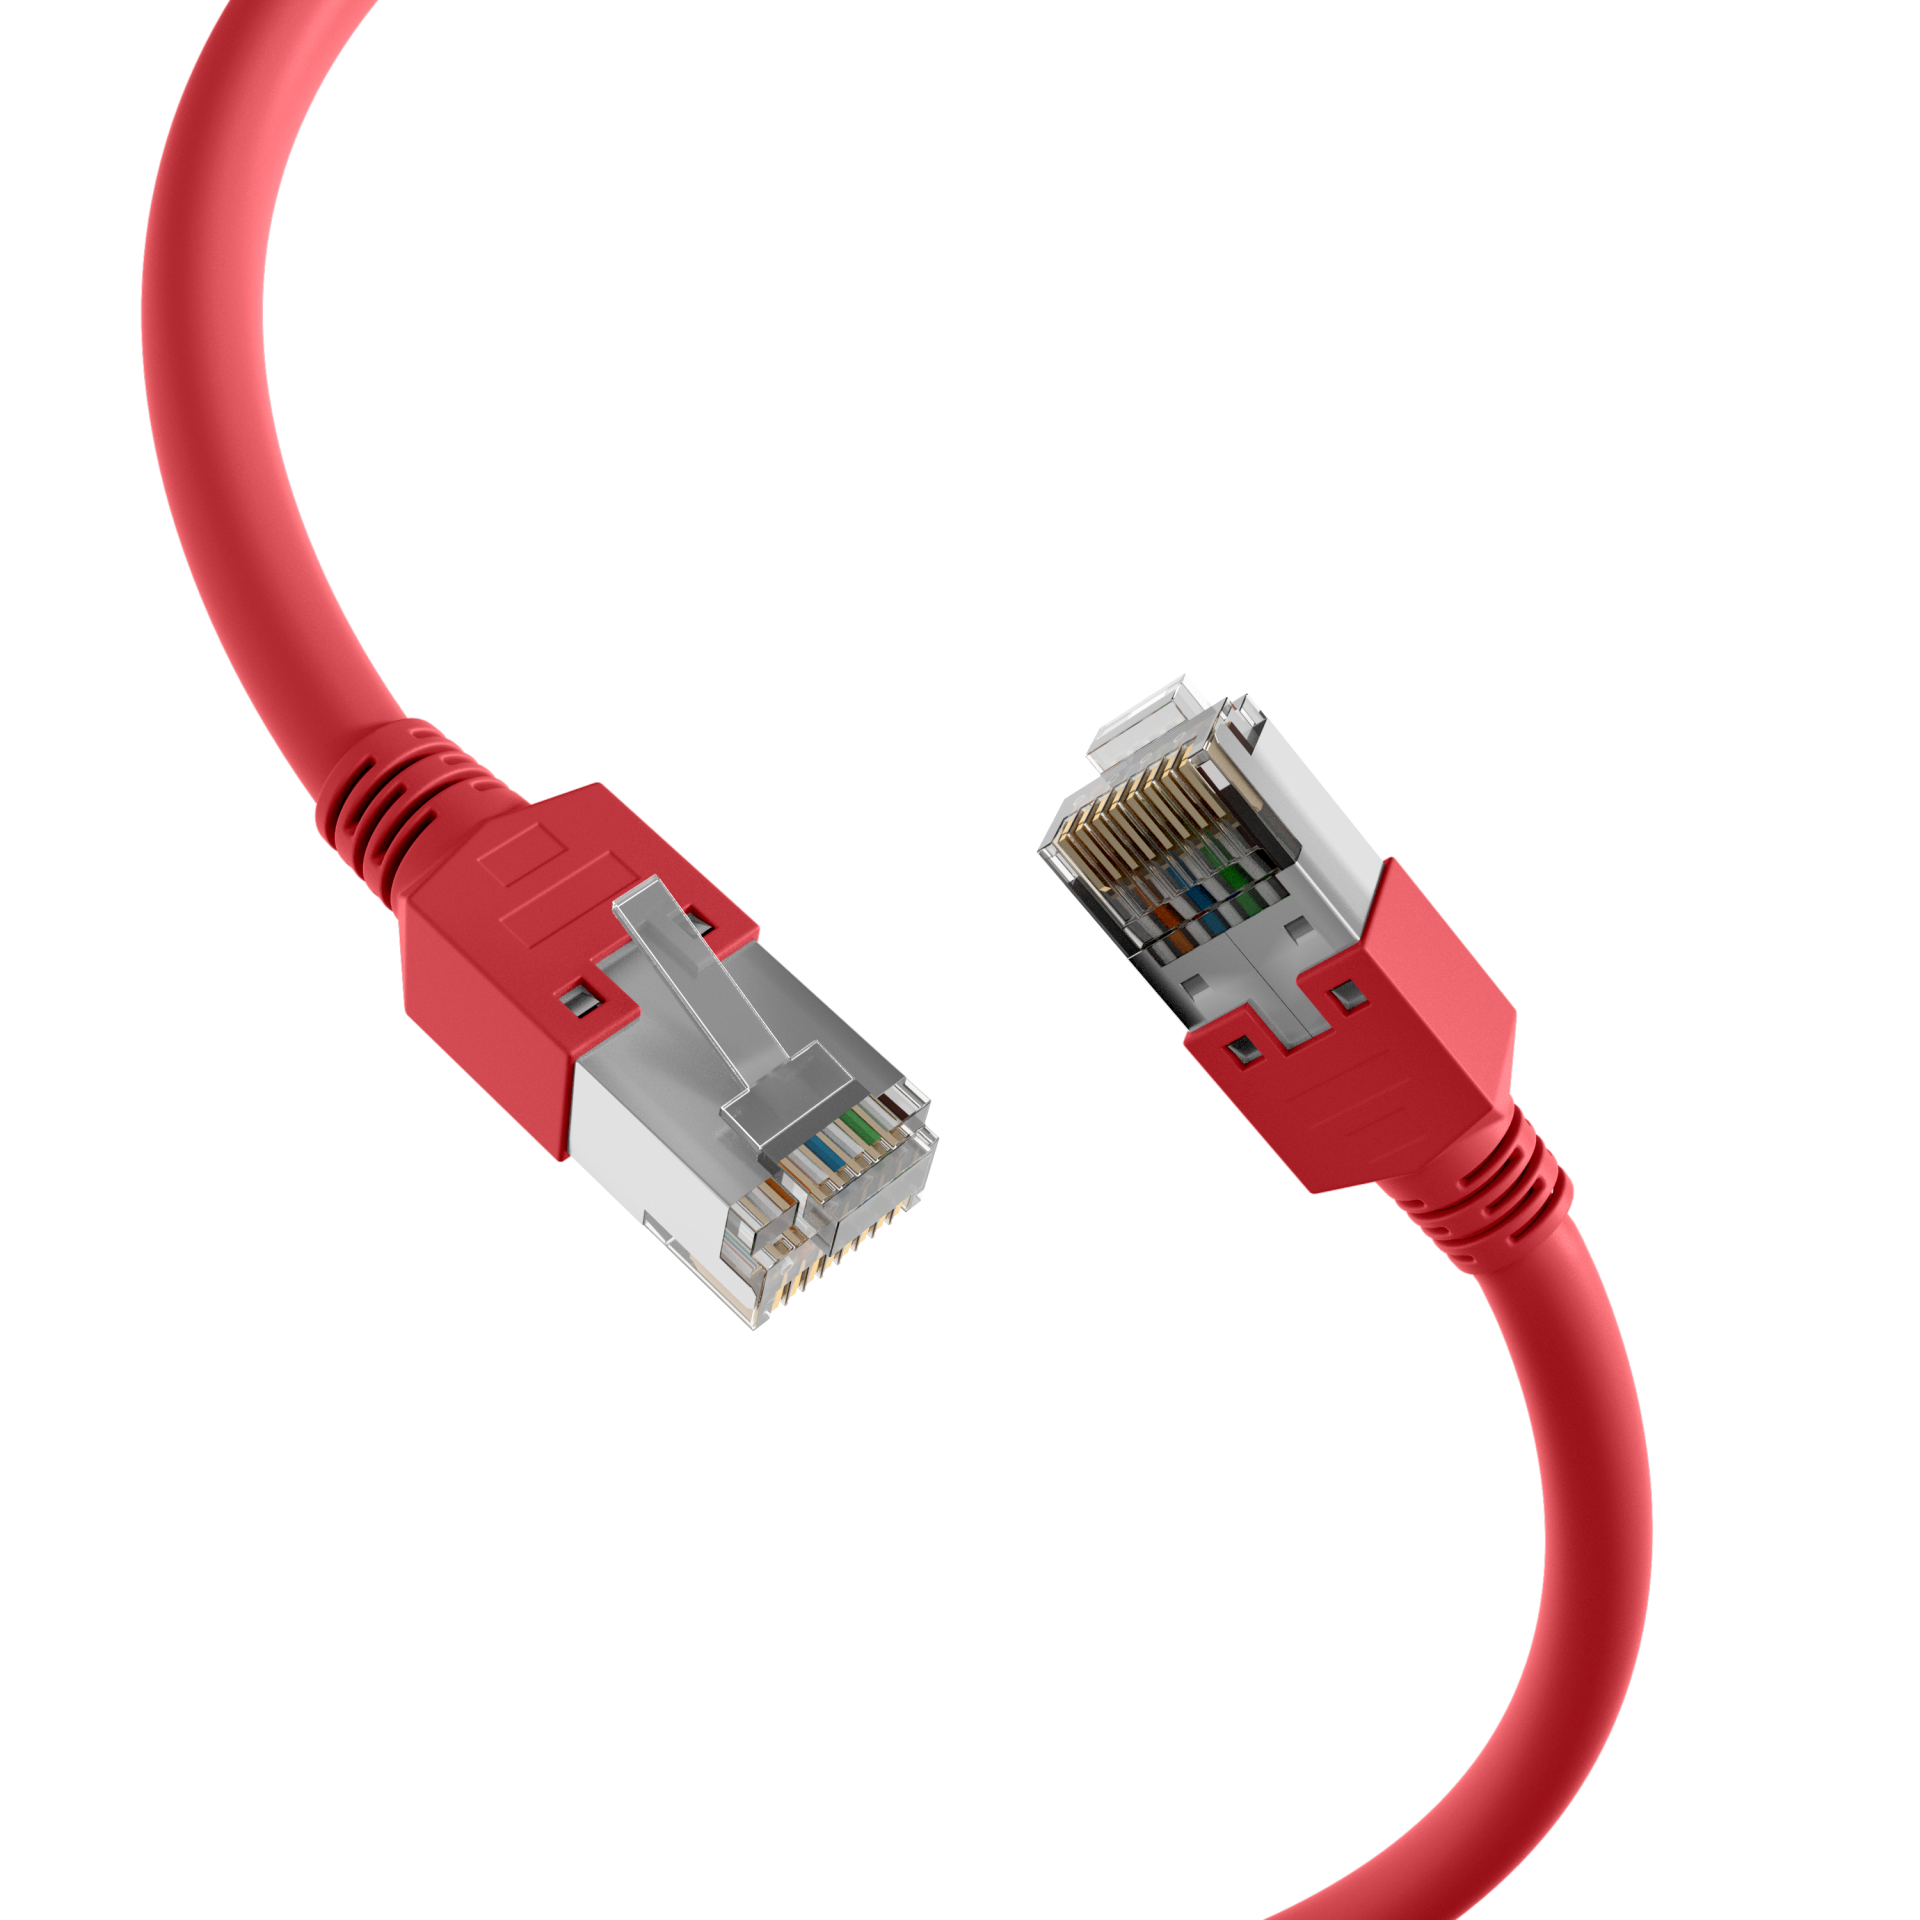 RJ45 Patch Cord Cat.5e S/UTP PVCDätwyler 5502 TM11 red 30m